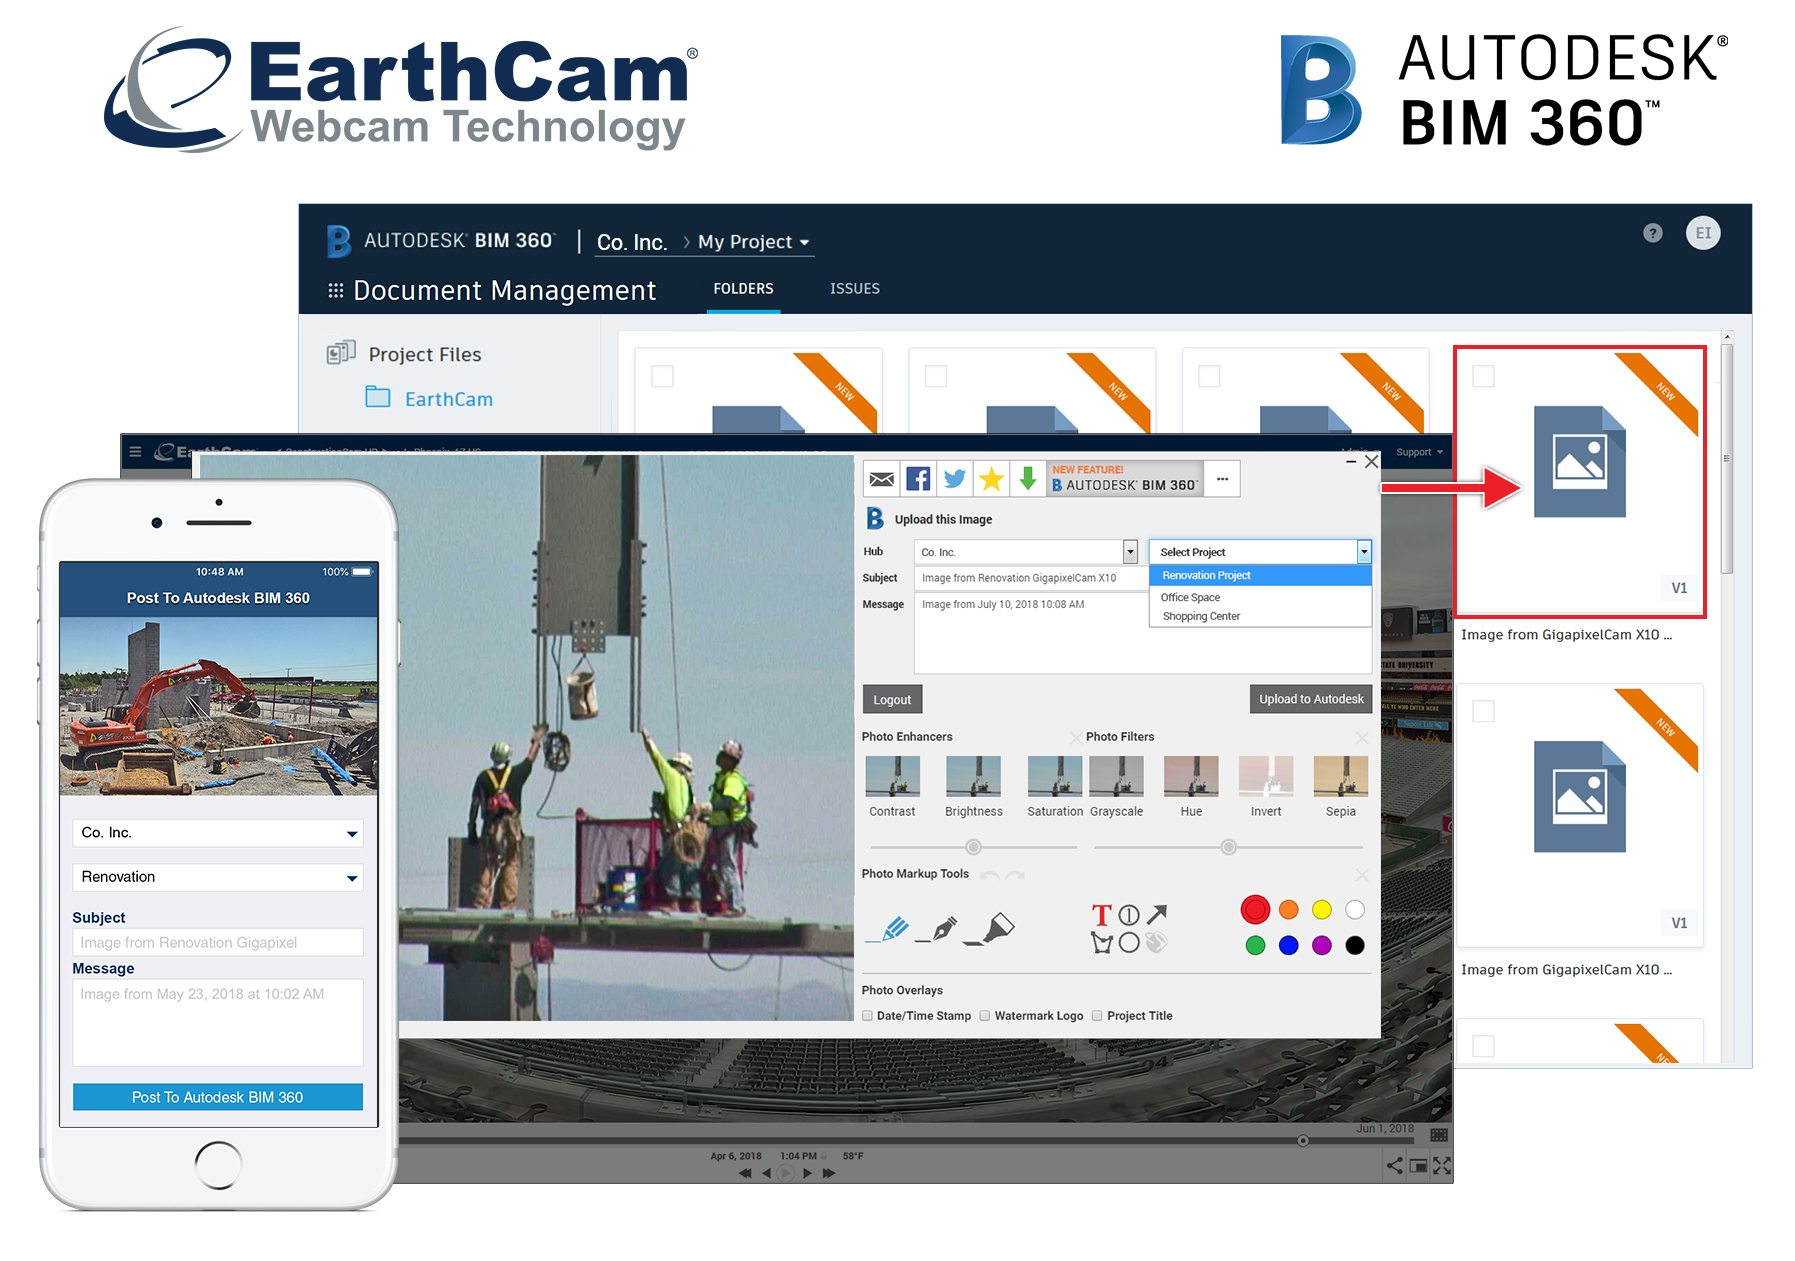 Autodesk BIM 360 users now have access to EarthCam's high quality webcam imagery, 360 photos and video to support important construction archives.